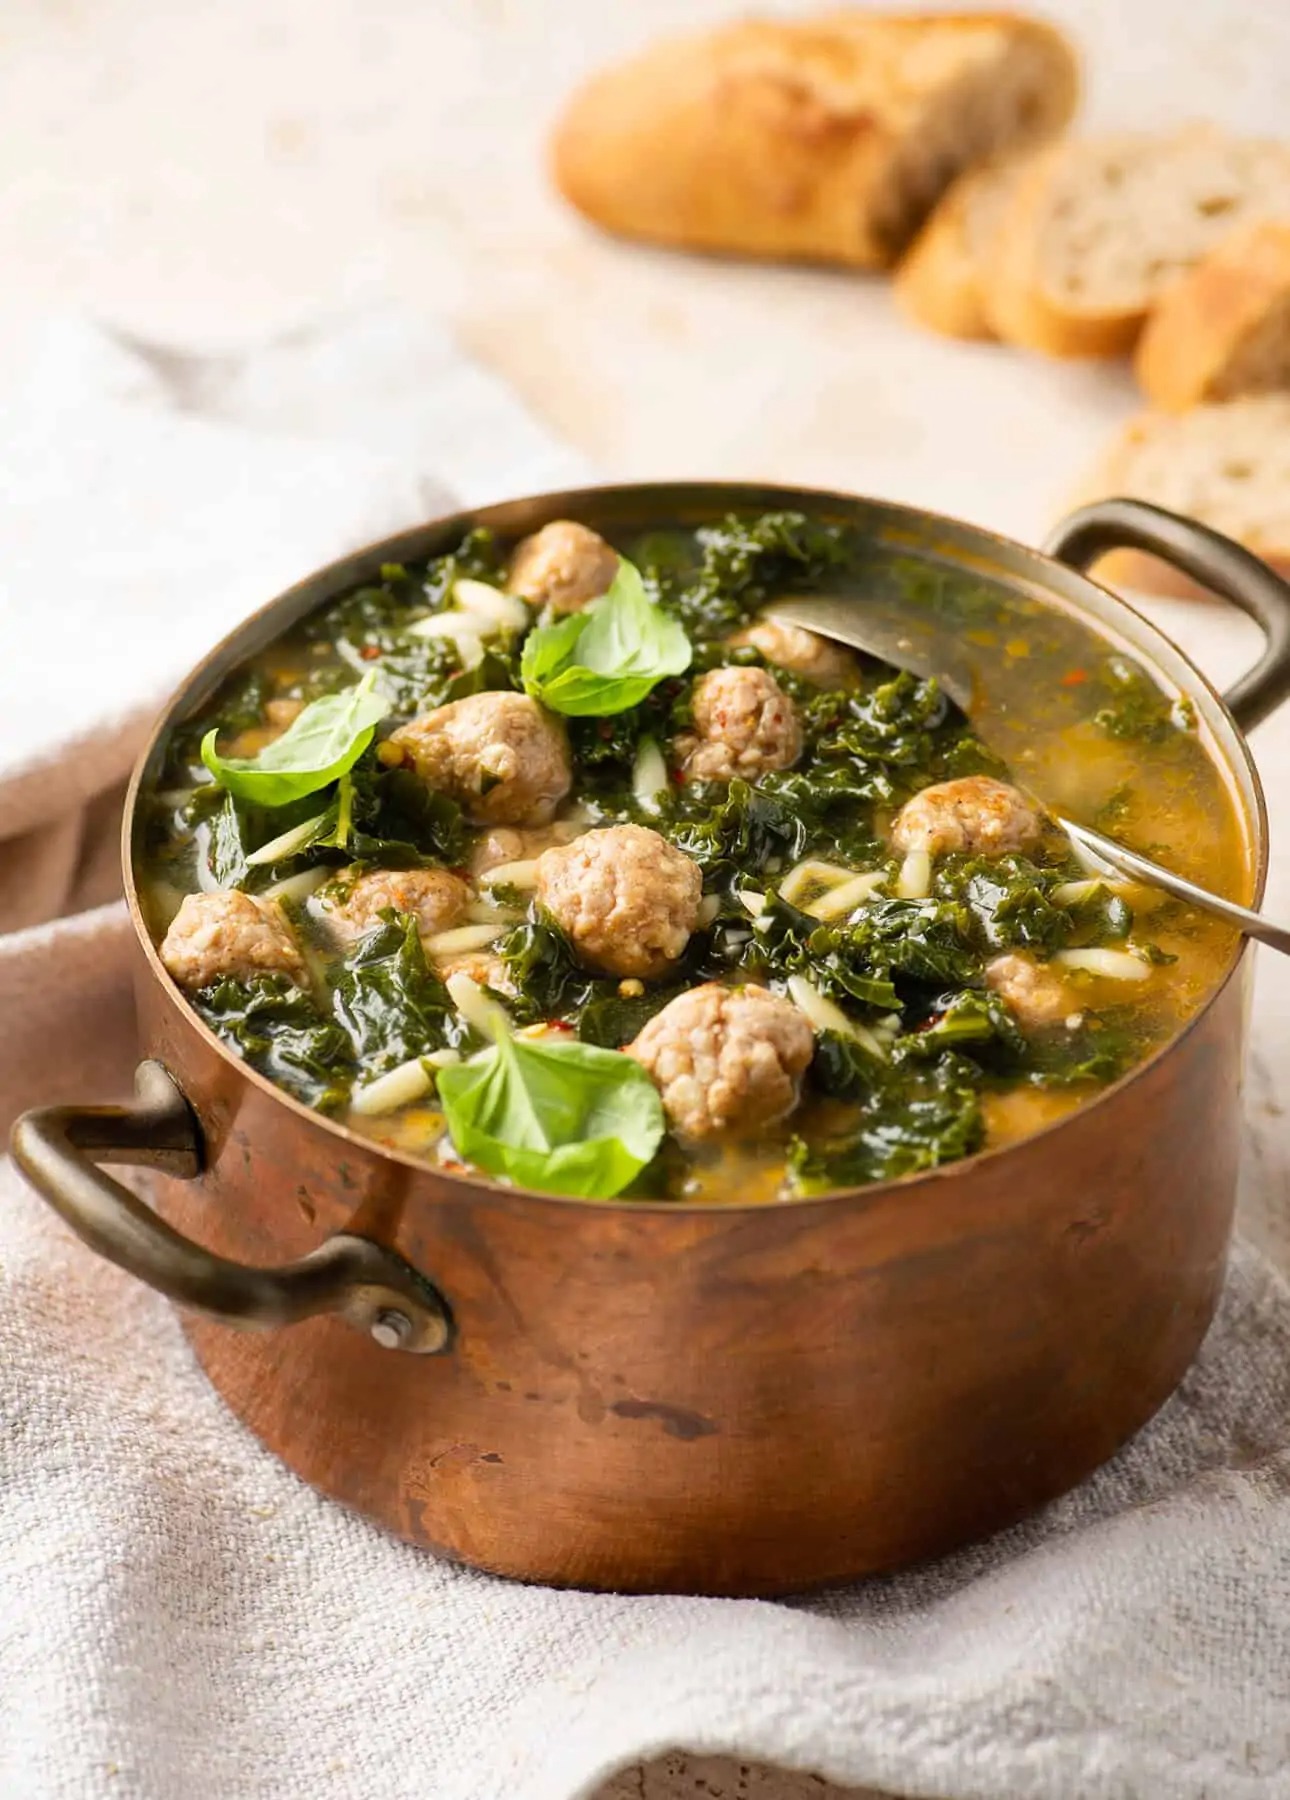 Italian Wedding Soup by Food Nouveau // 21 Easy Authentic Italian Pasta Dishes for Weeknight Dinners